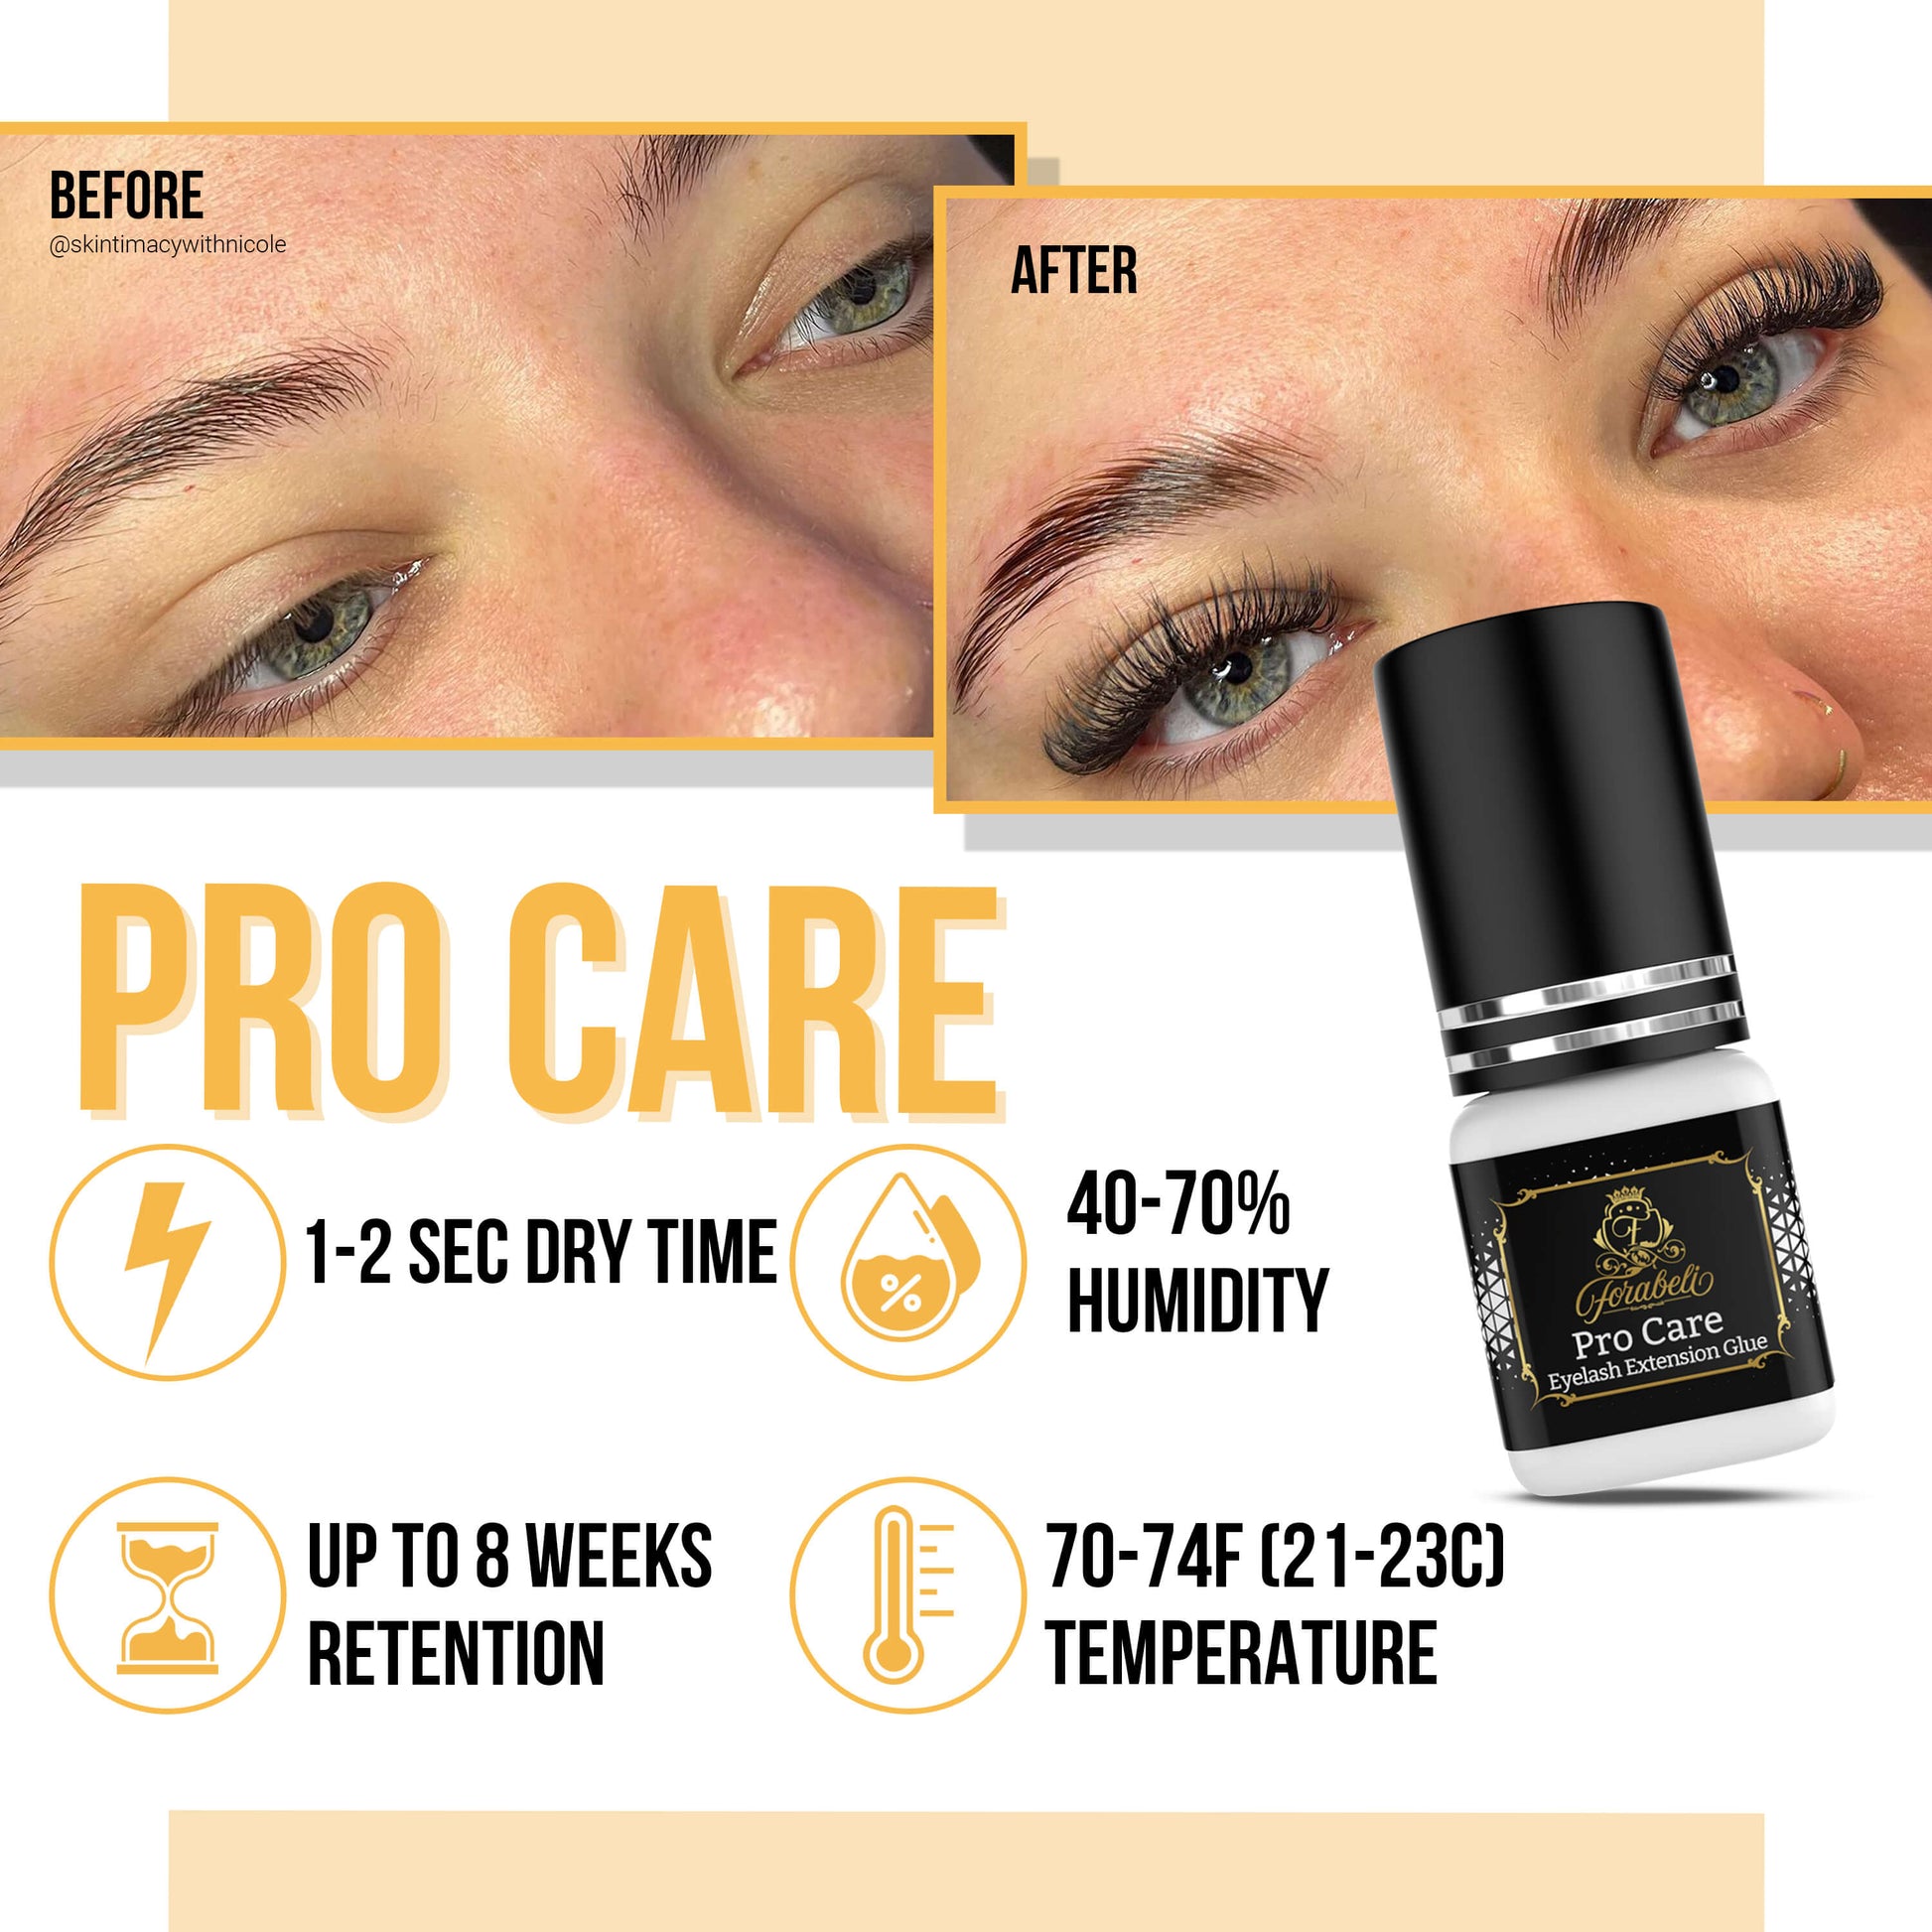 Elite eyelash extension glue with a rapid drying time of 1 - 2 second, impressive retention lasting up to 8 weeks. Ideal for environments with 40-70% relative humidity and temperatures between 70-74°F (21-23°C).